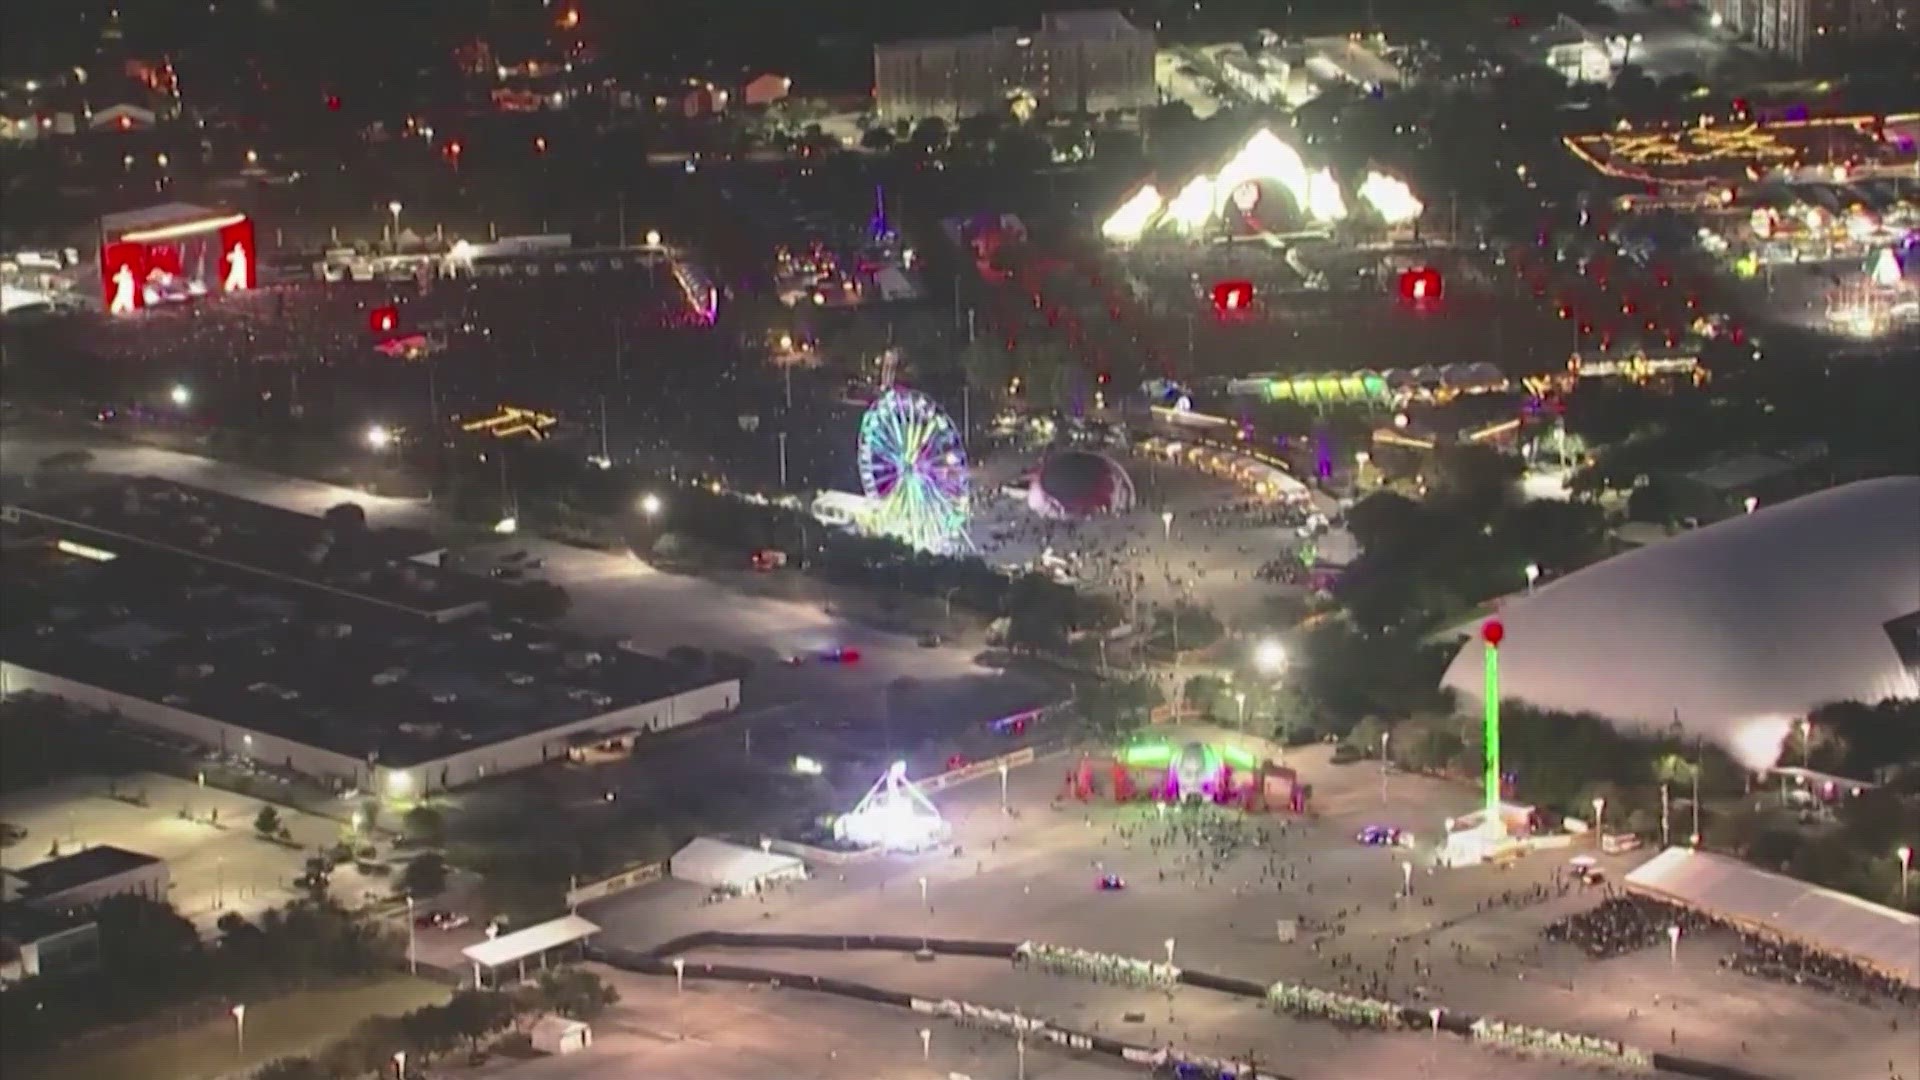 Ten people, including a 9-year-old boy, died at or after the Astroworld Festival in 2021.